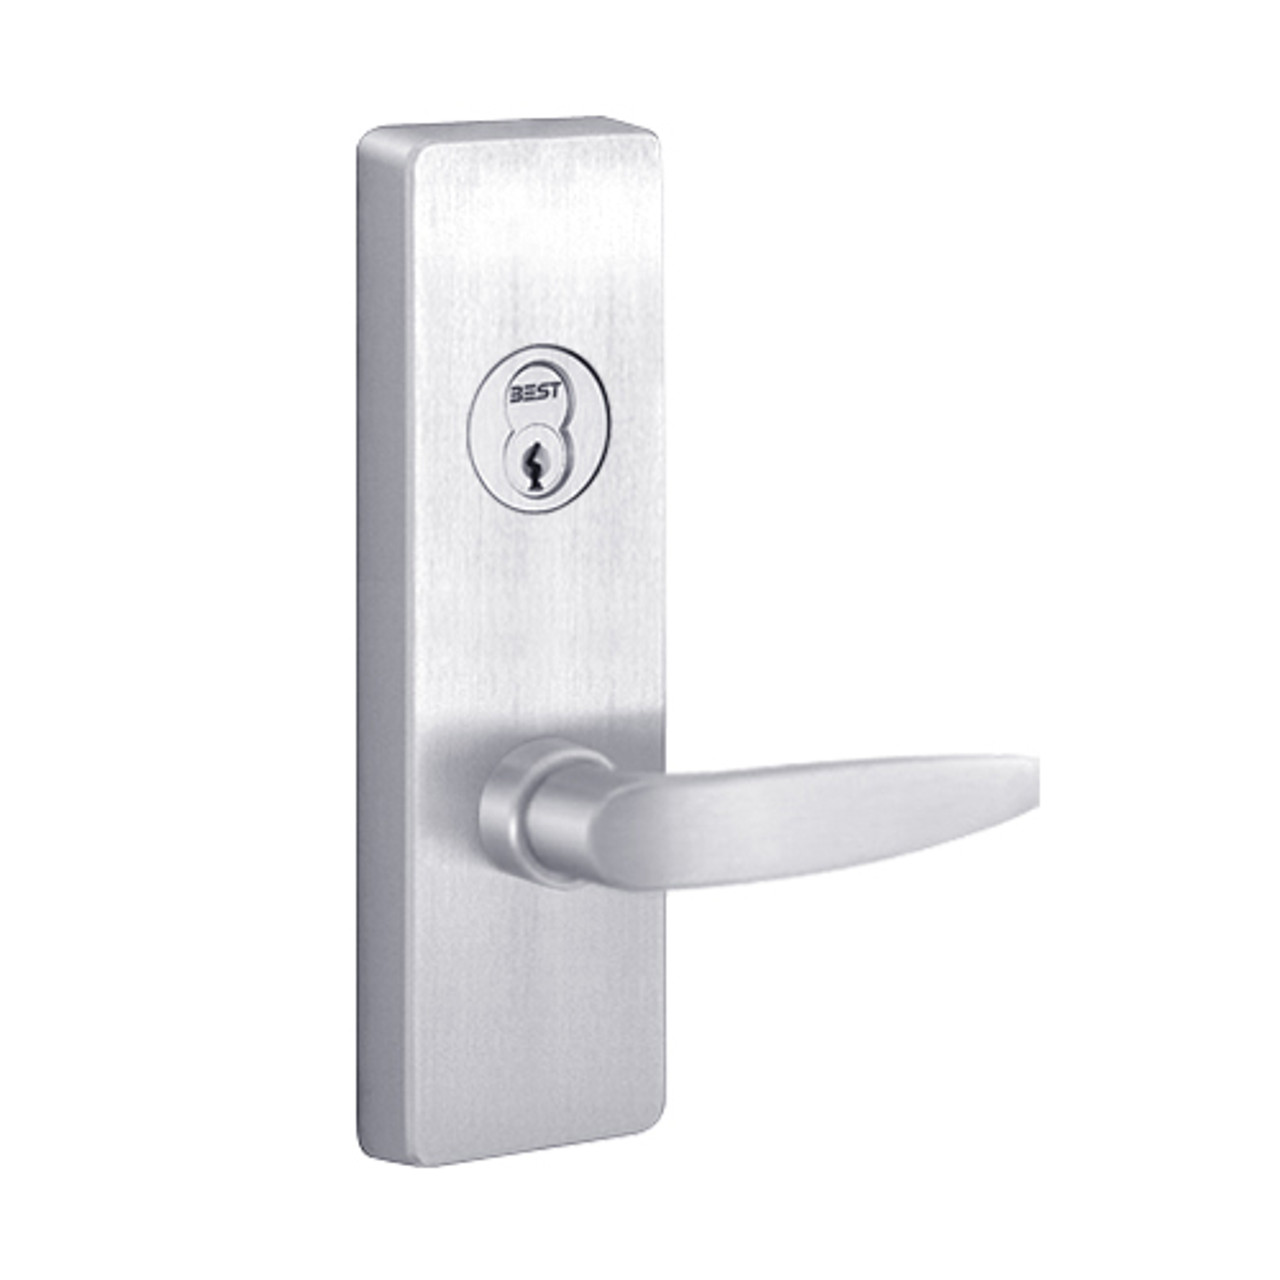 RM4903B-625-RHR PHI Key Retracts Latchbolt Retrofit Trim with B Lever Design for Apex and Olympian Series Exit Device in Bright Chrome Finish